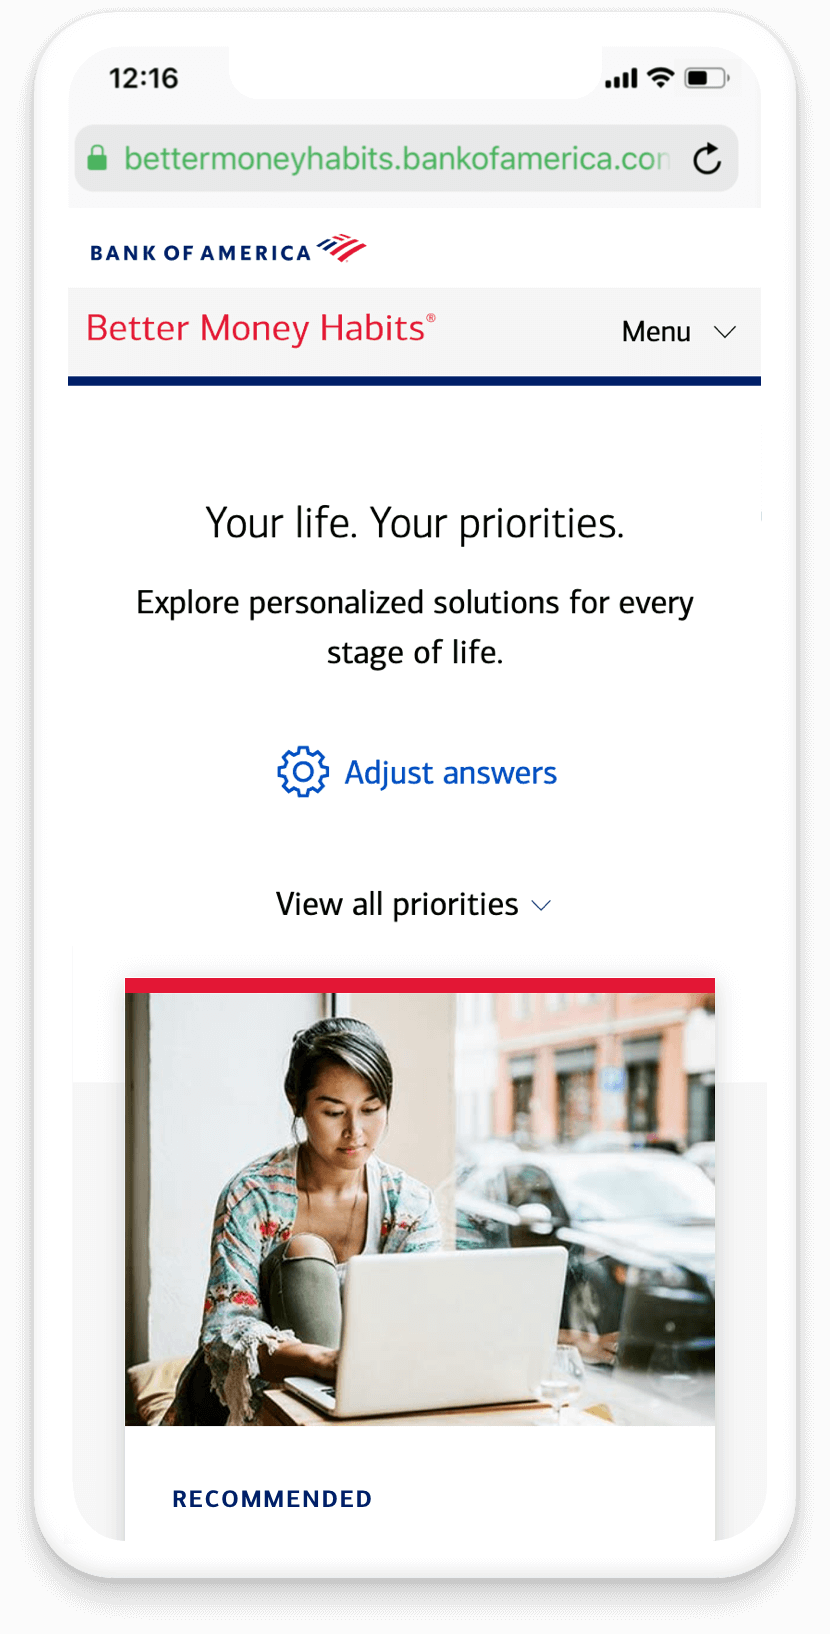 BMH life priorities widget results page